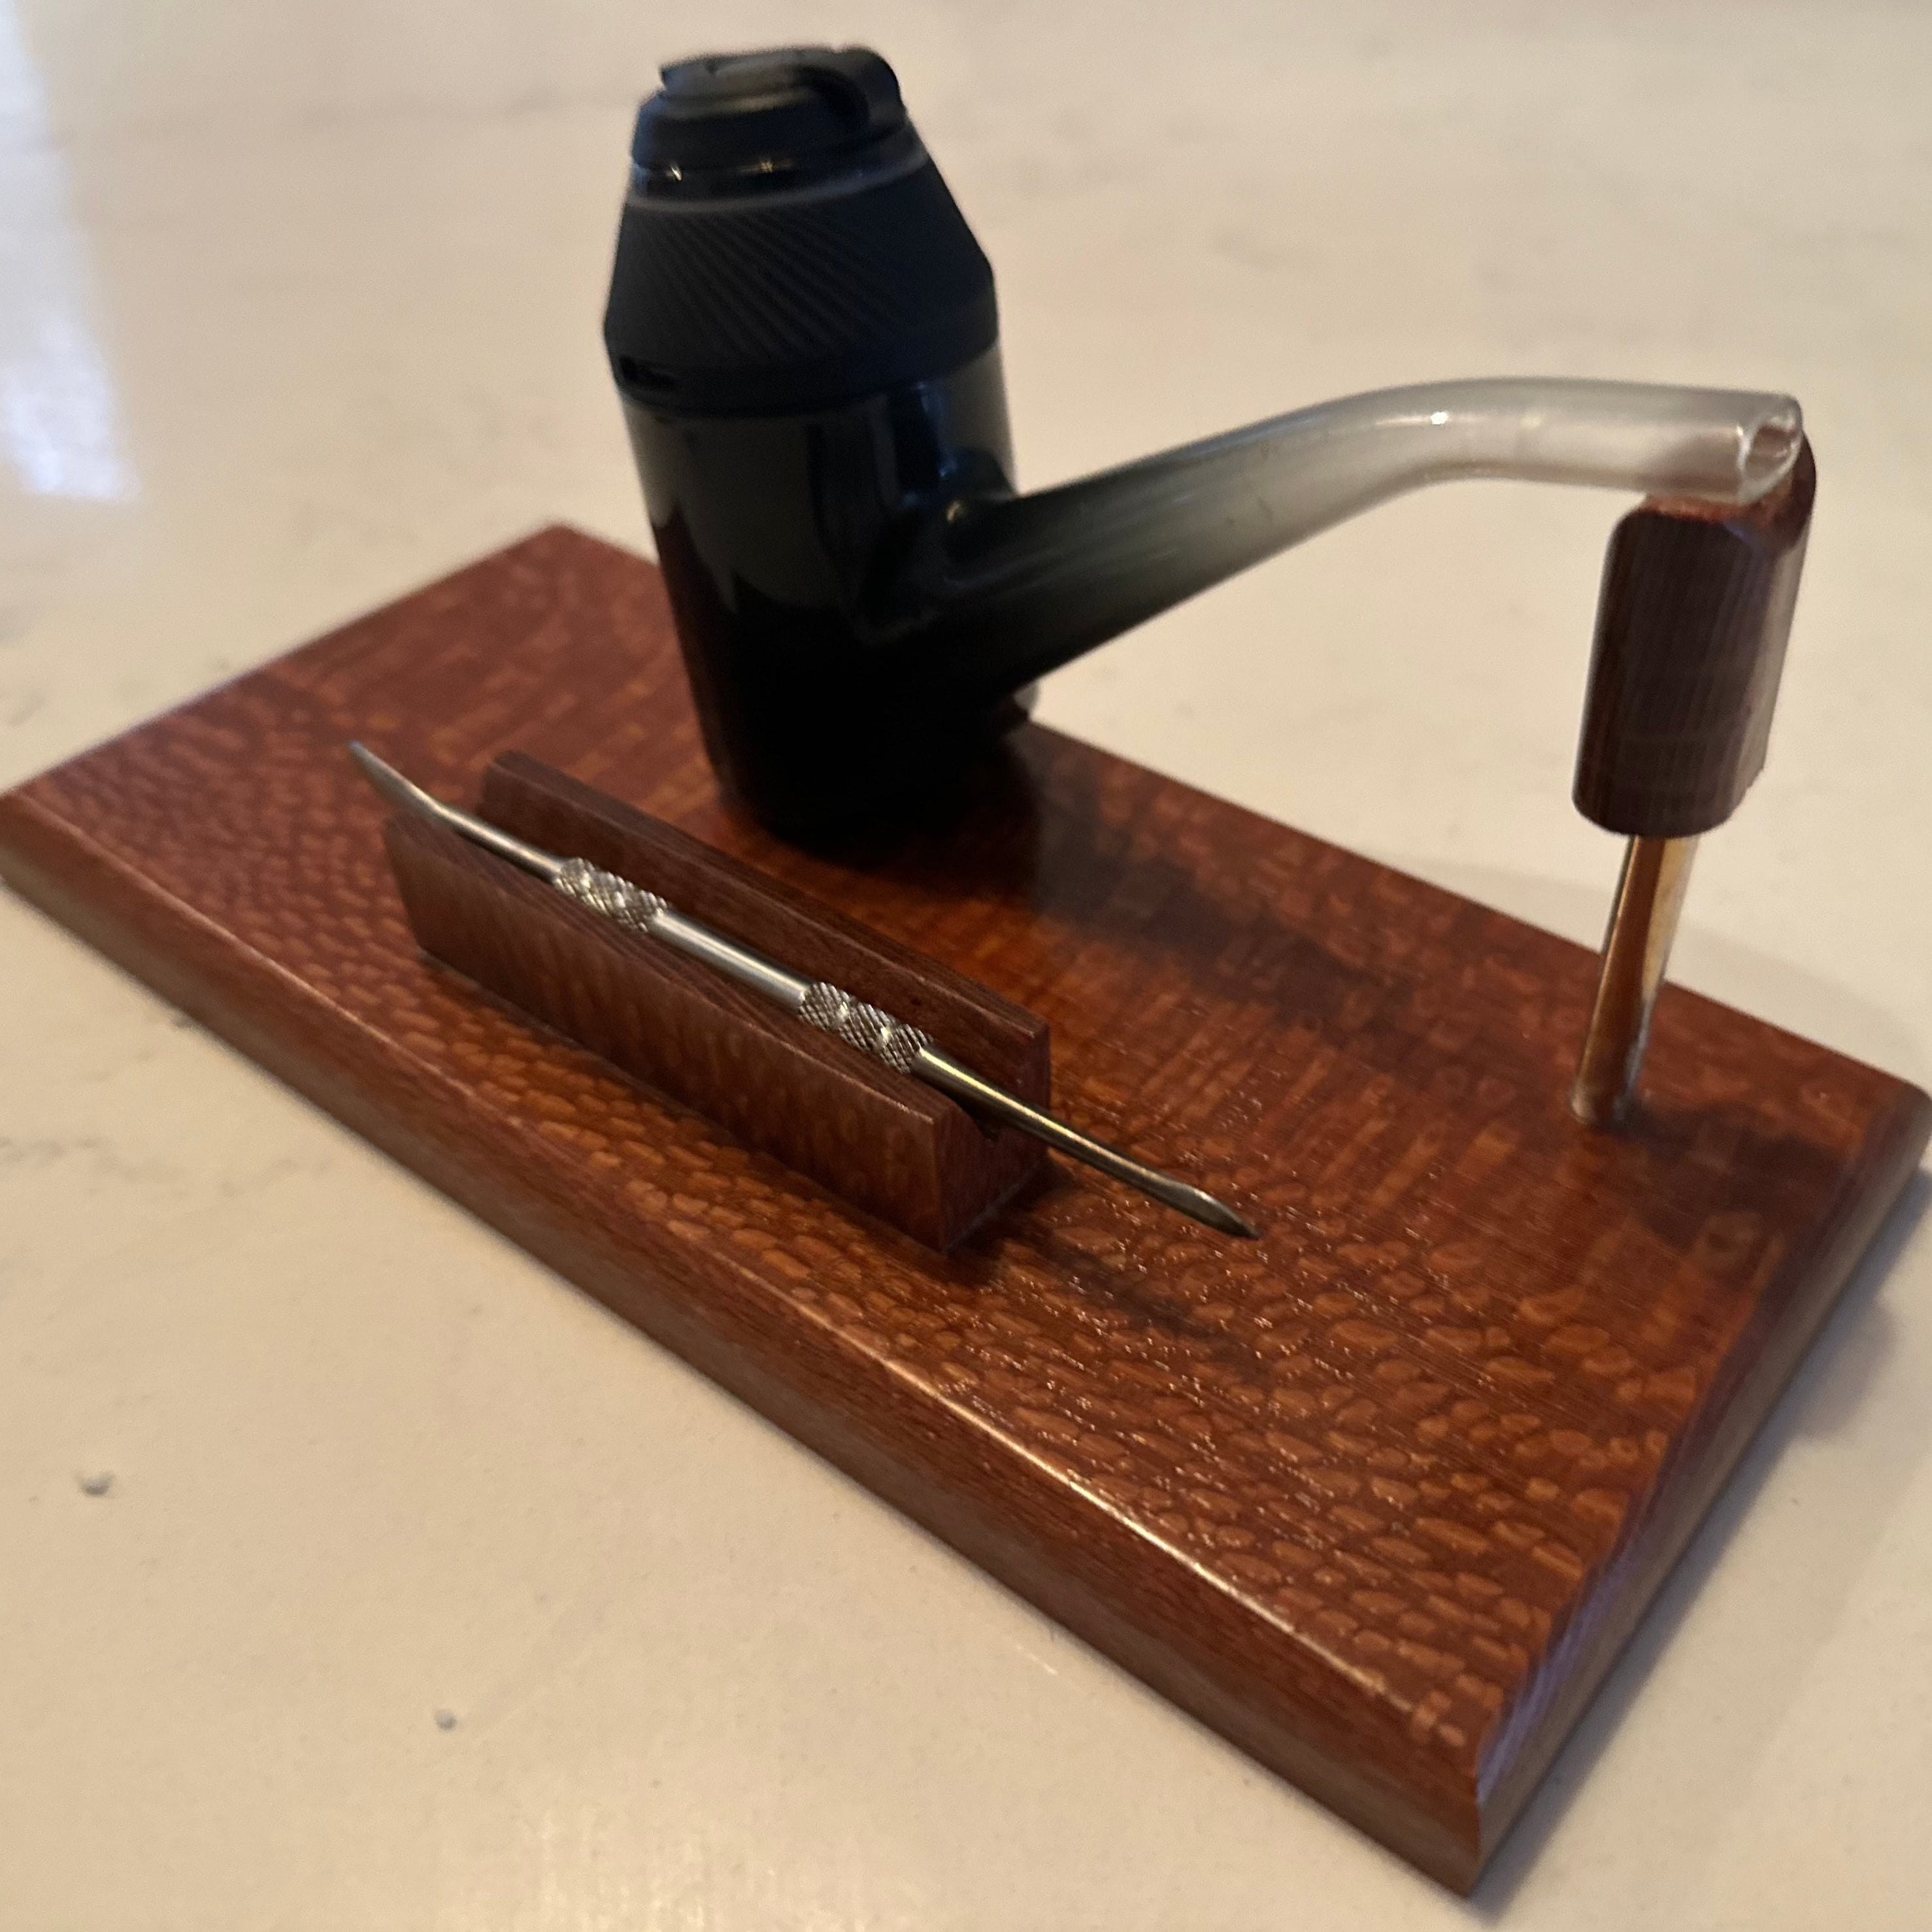 Wooden dab holder stand and pipe holder.